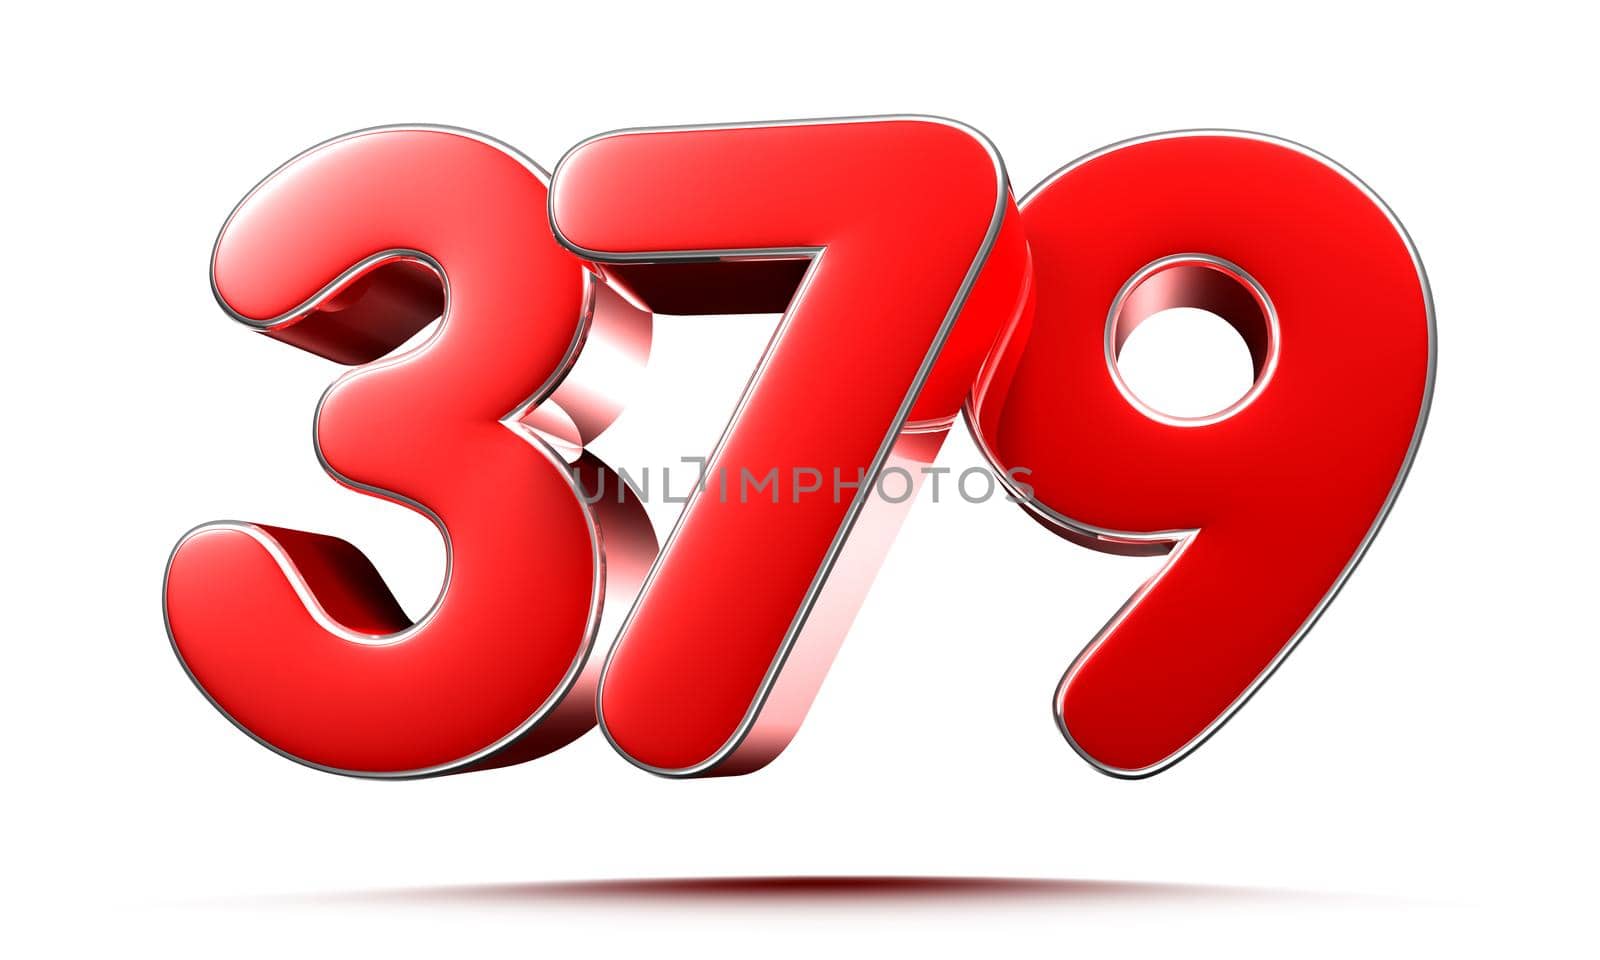 Rounded red numbers 379 on white background 3D illustration with clipping path by thitimontoyai